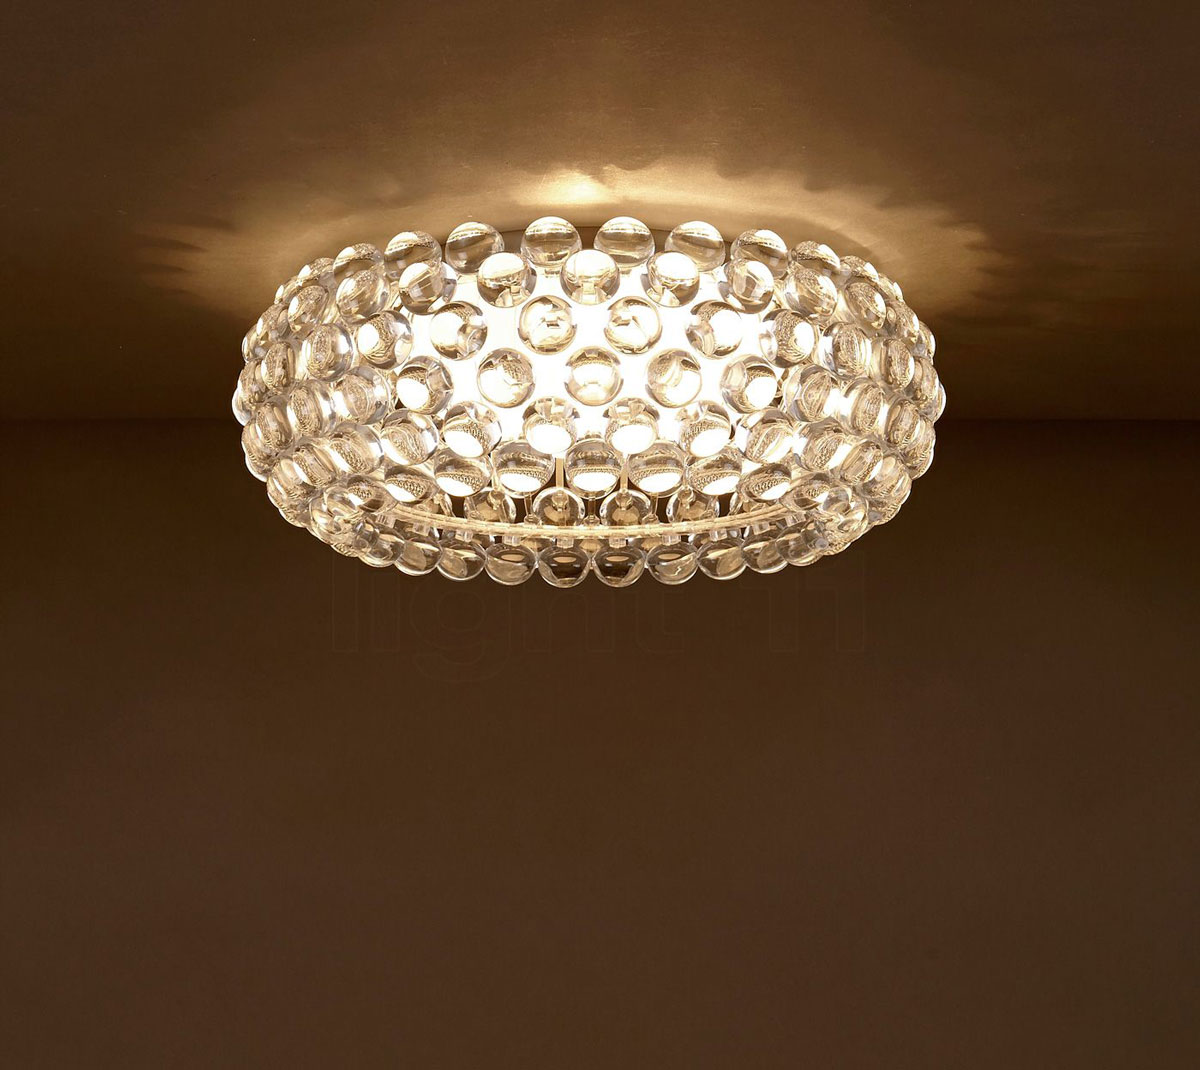 Luminaires / Plafonniers / Caboche